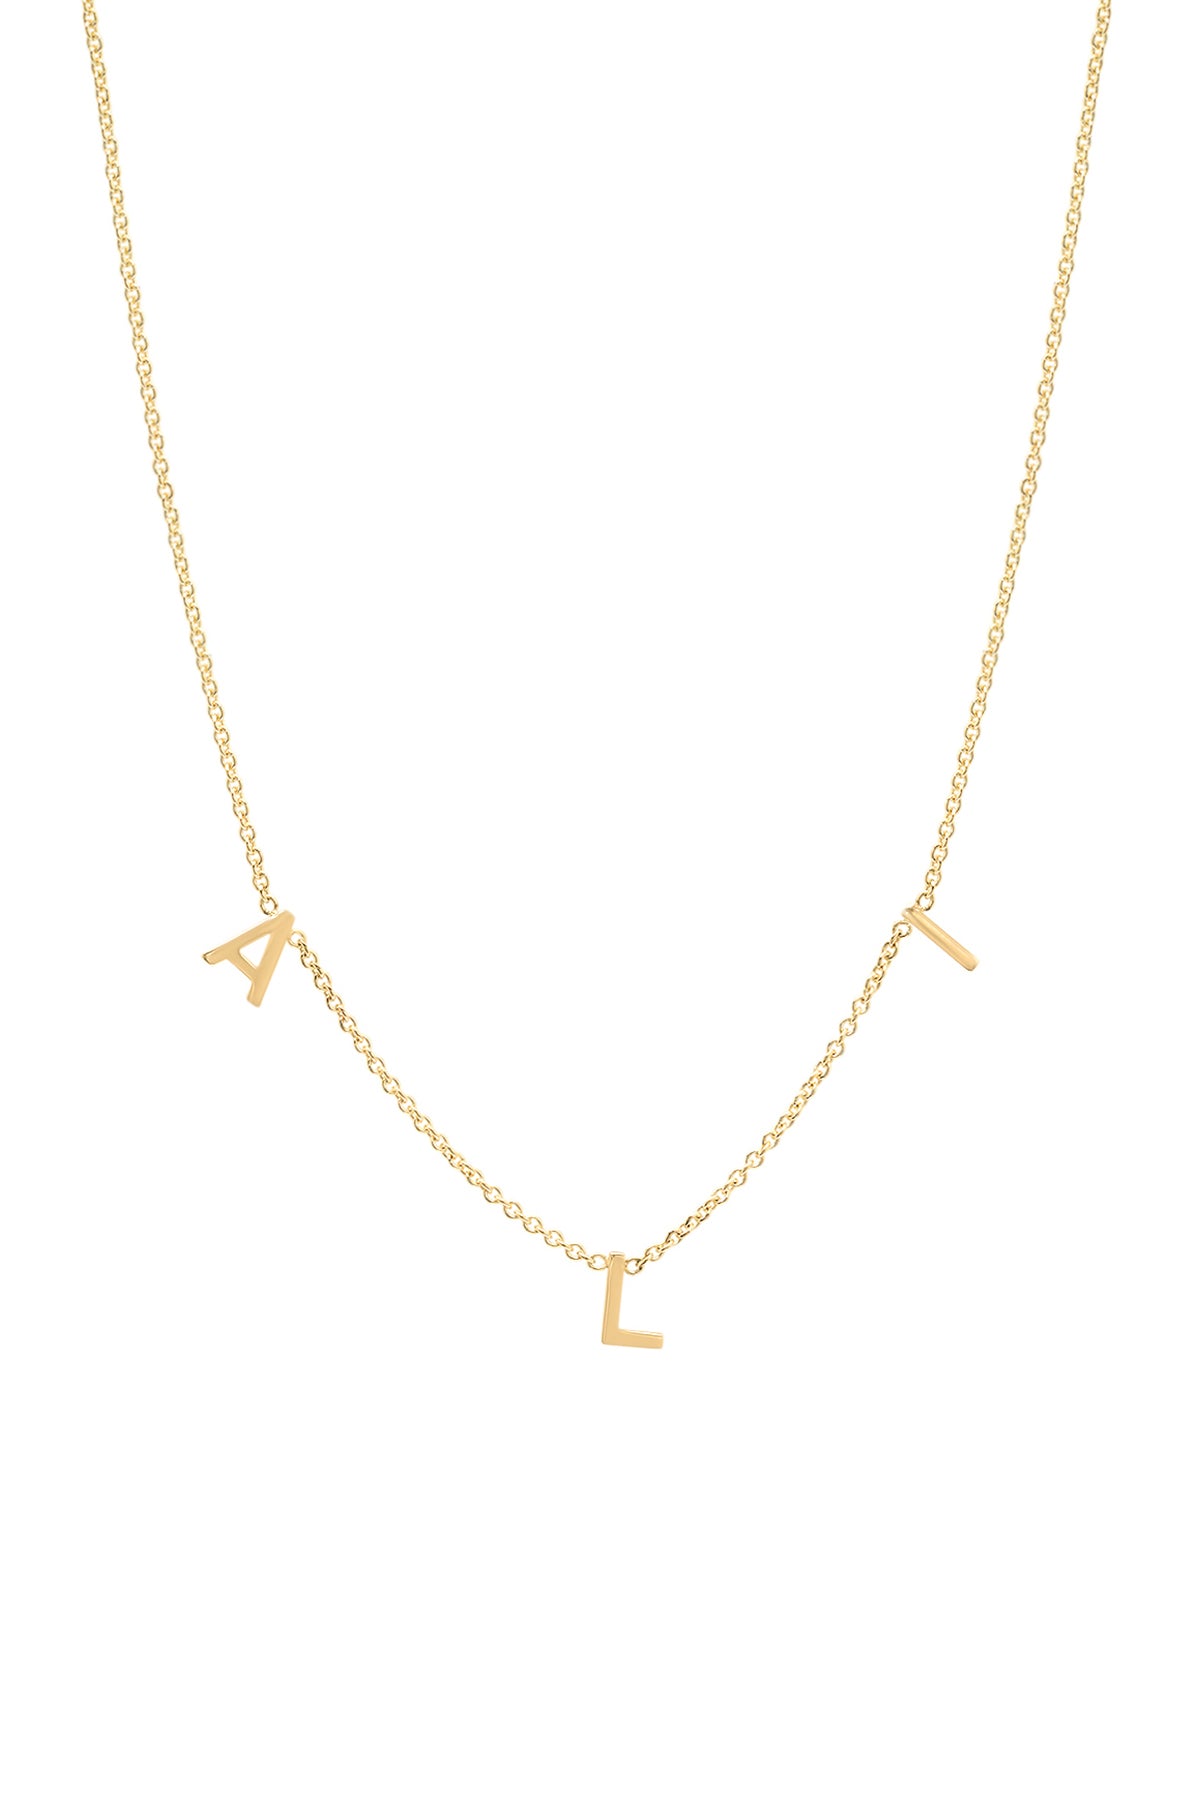 KIDS Spaced Letter Necklace - 14k Yellow Gold